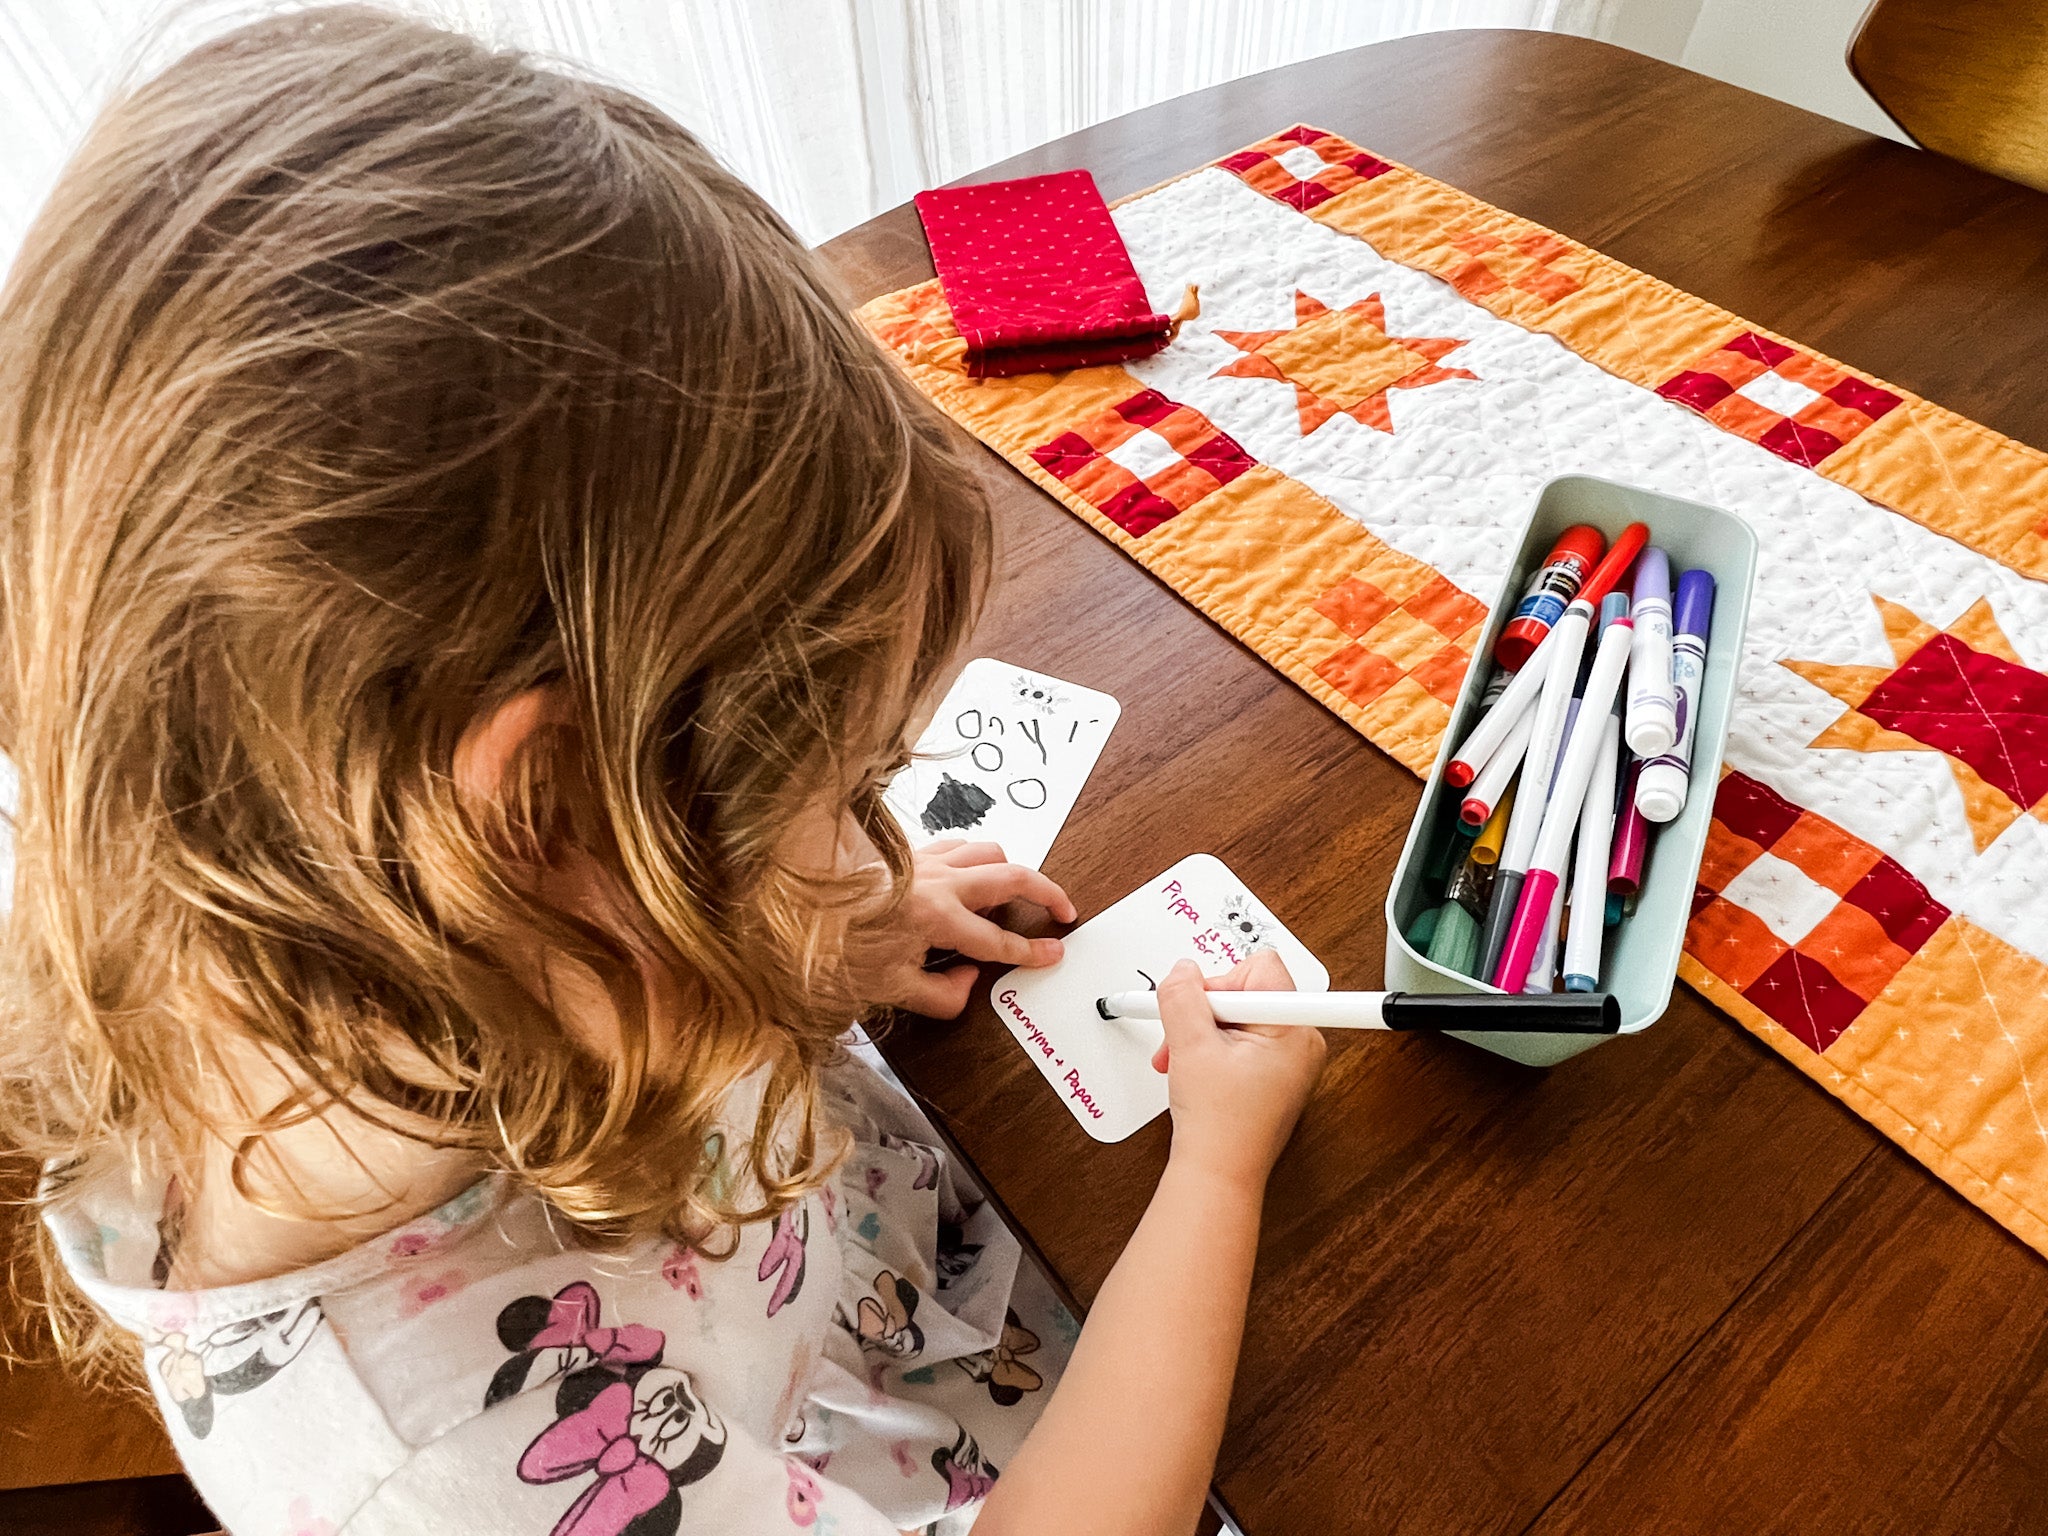 Pippa, my daughter, age 3, drawing on her gratitude journaling card for the pockets full of blessings table runner pattern collection